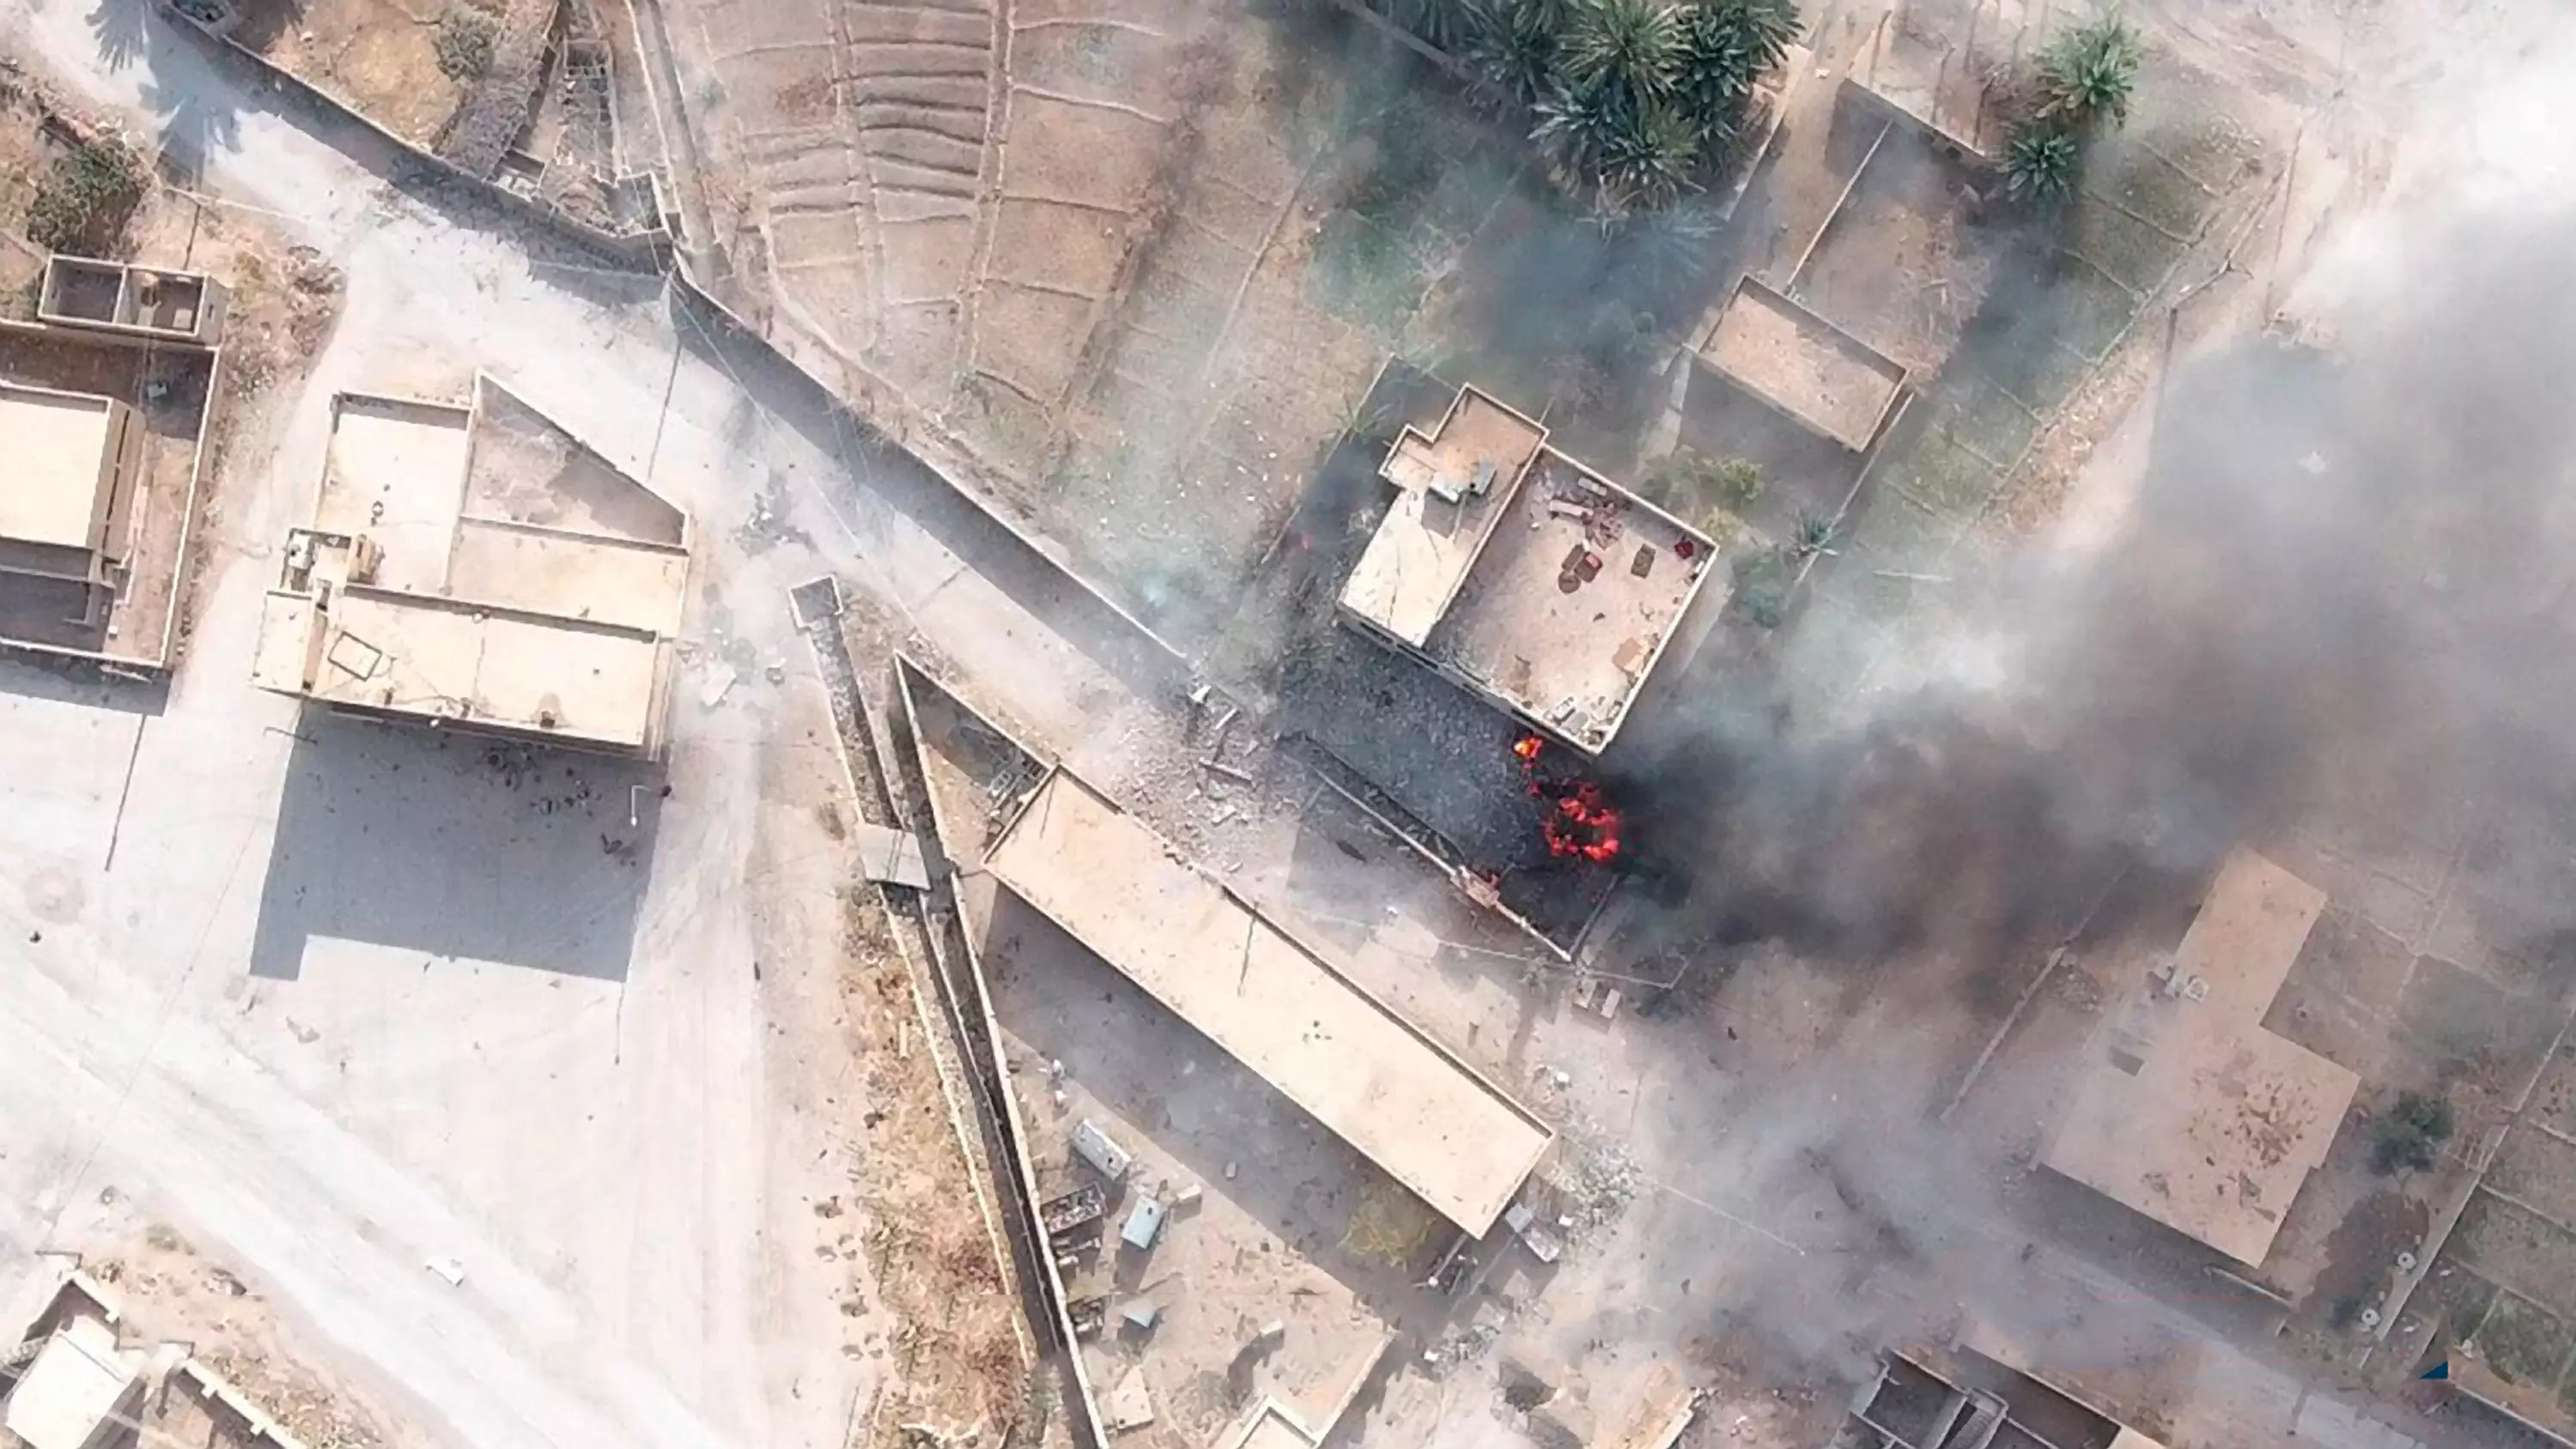 Image taken from a propaganda drone video showing Islamic State suicide bomber attack on a Syrian Army positions (